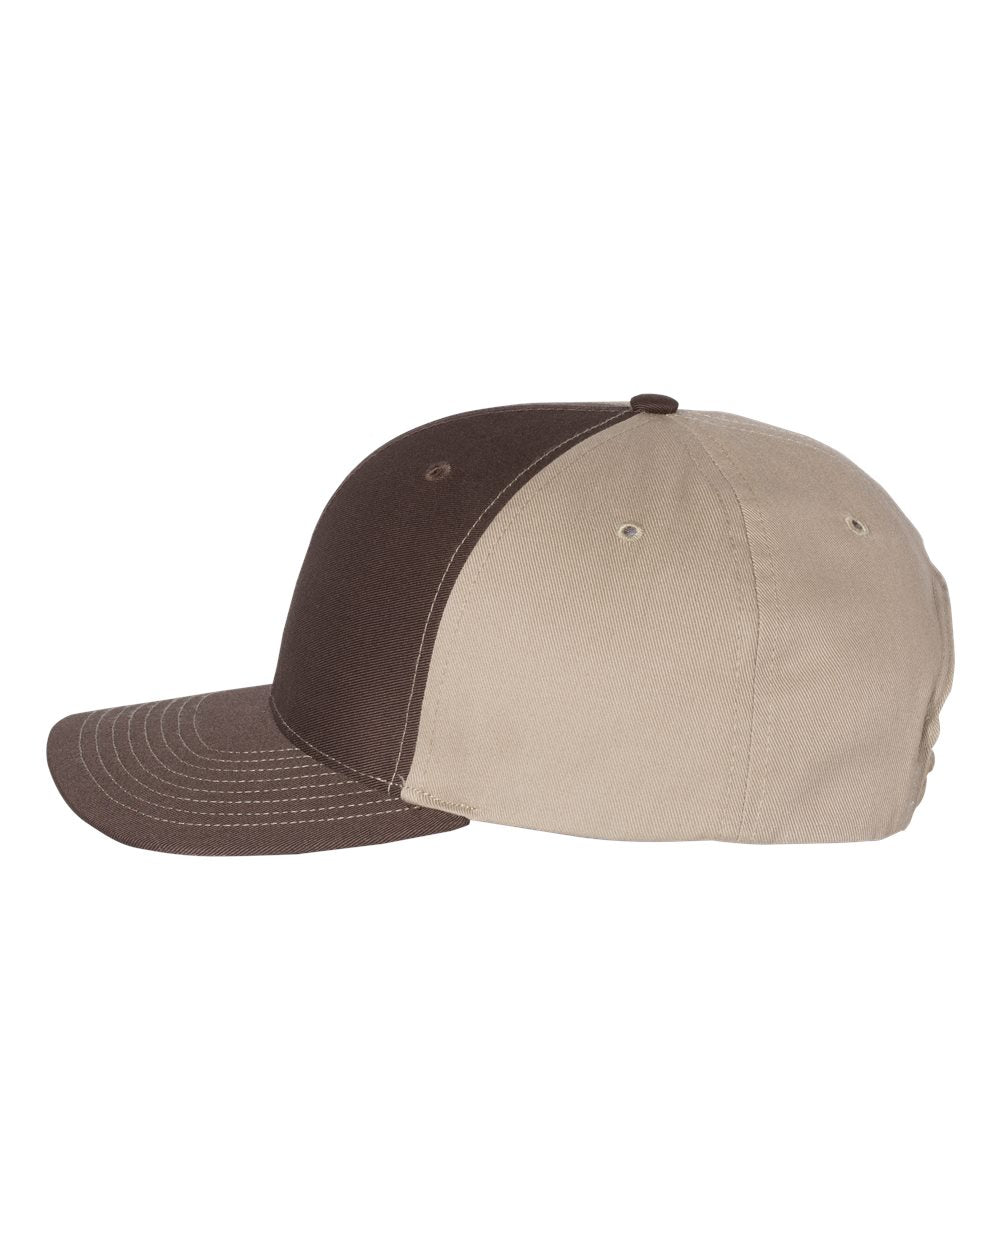 A Richardson twill back trucker cap with a brown front panel and khaki twill back.